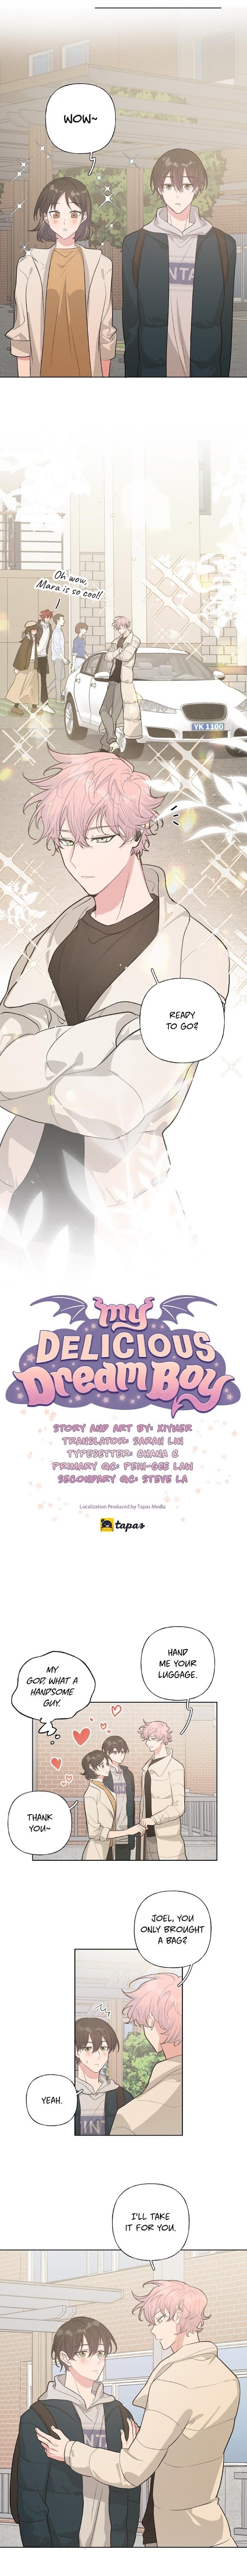 Your Dream Is Deliciousyour Dream Is Delicious - Page 2